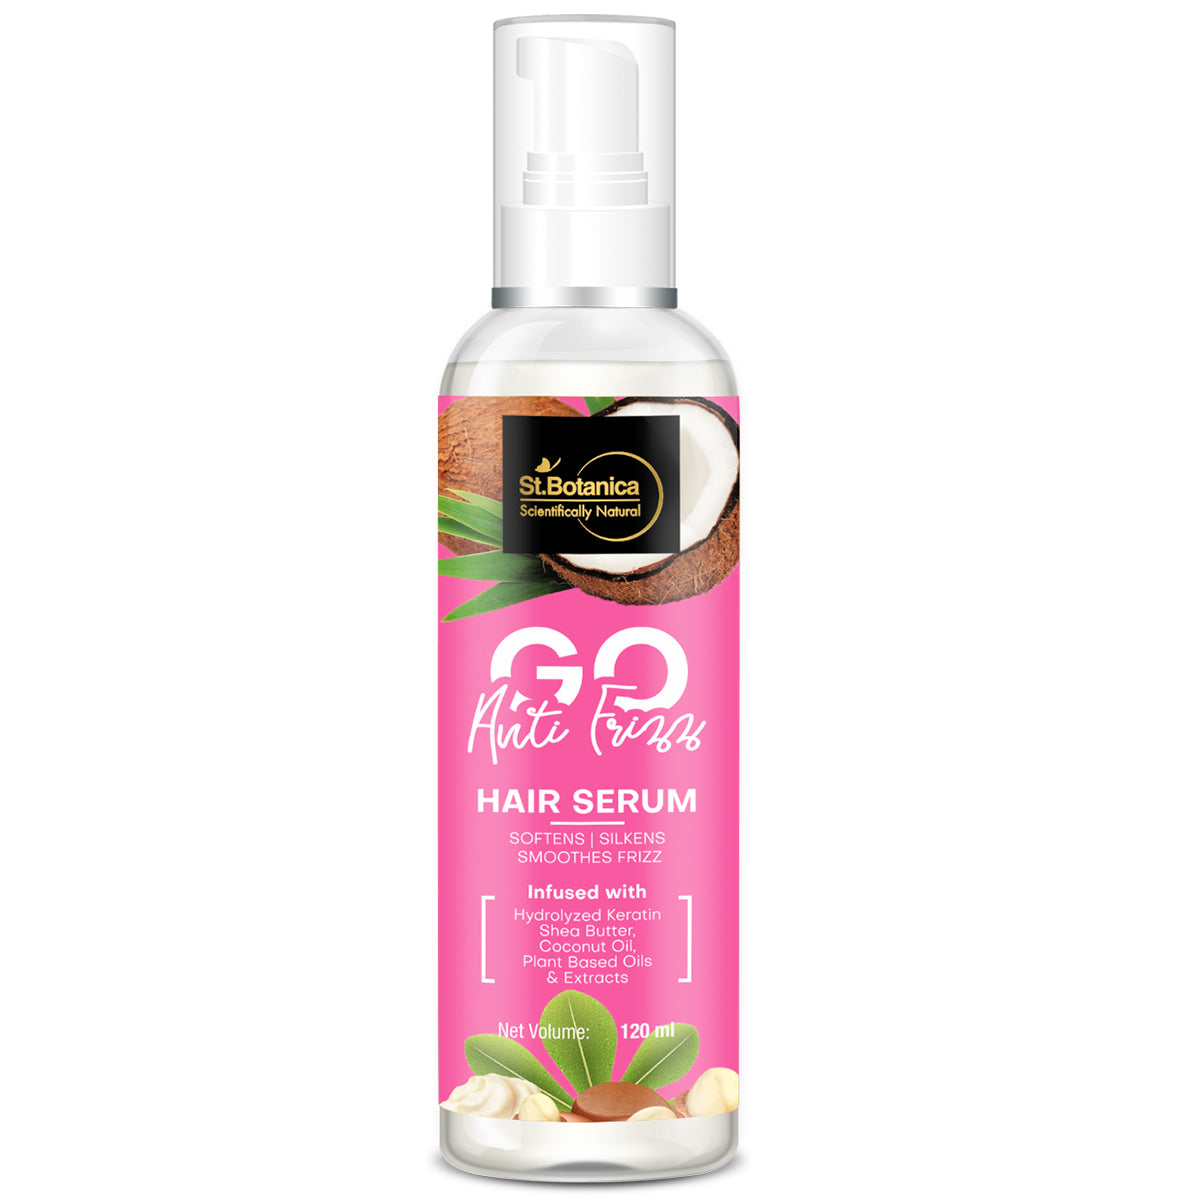 St.Botanica GO Anti Frizz Hair Serum - Infused With Hydrolyzed Keratin, Shea Butter, Coconut Oil For Frizz-free, Smooth & Lustrous Hair, 120ml